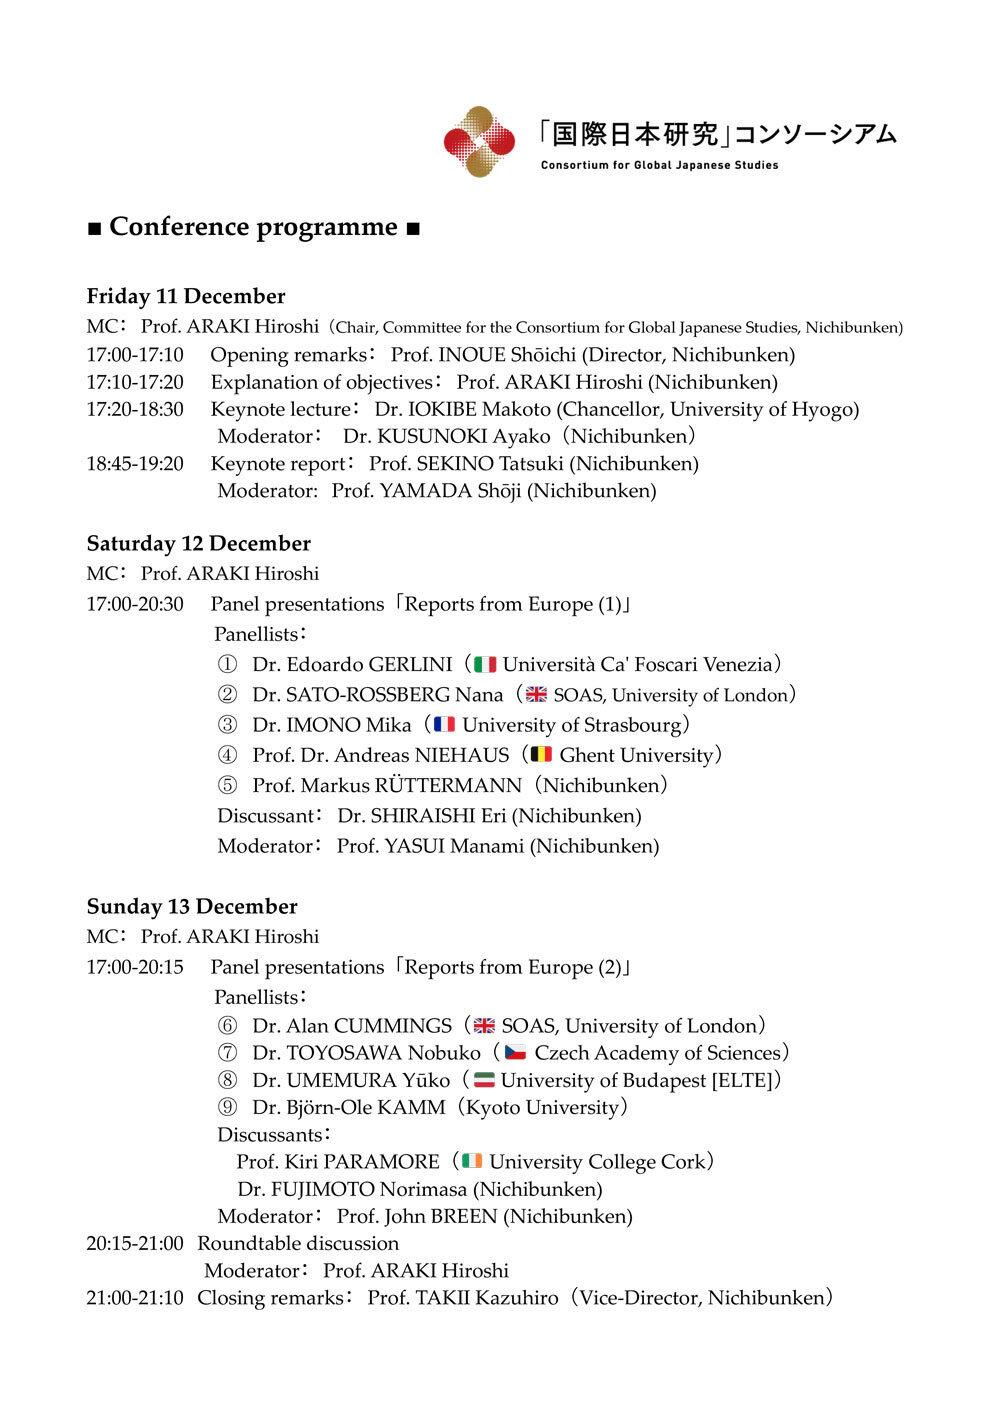 Conference programme (English)